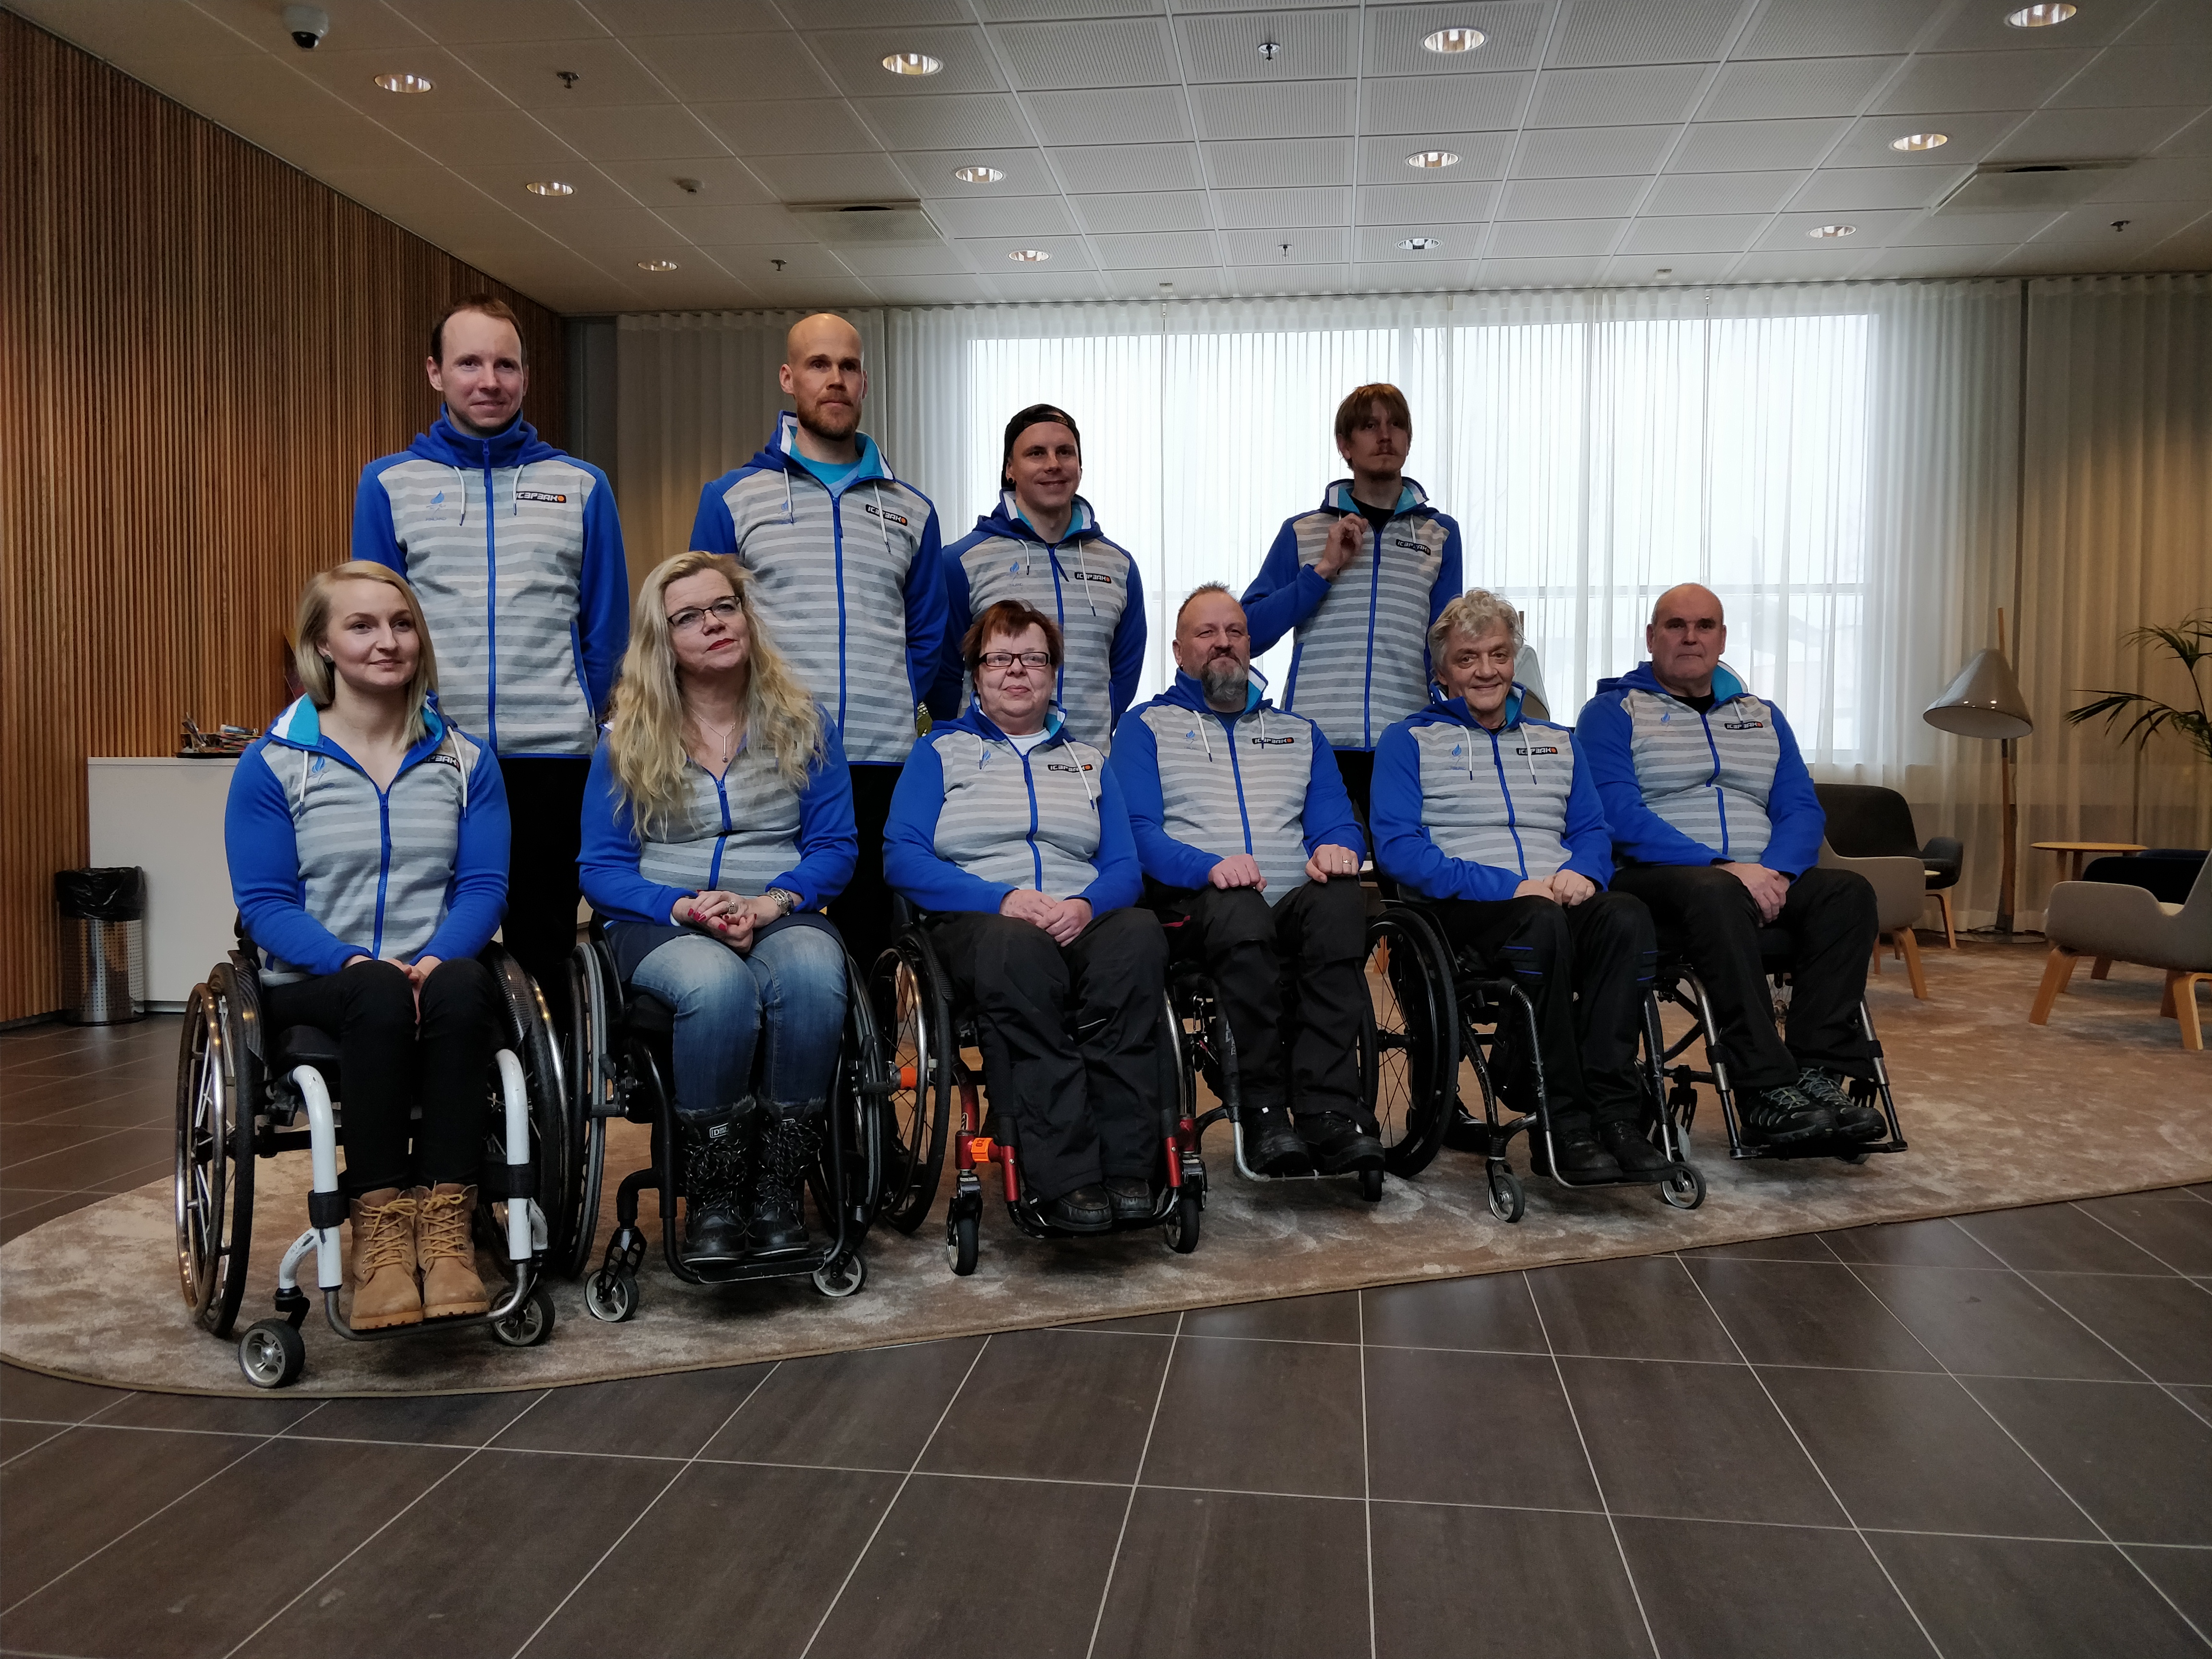 Four people standing behind a group of six people in wheelchairs